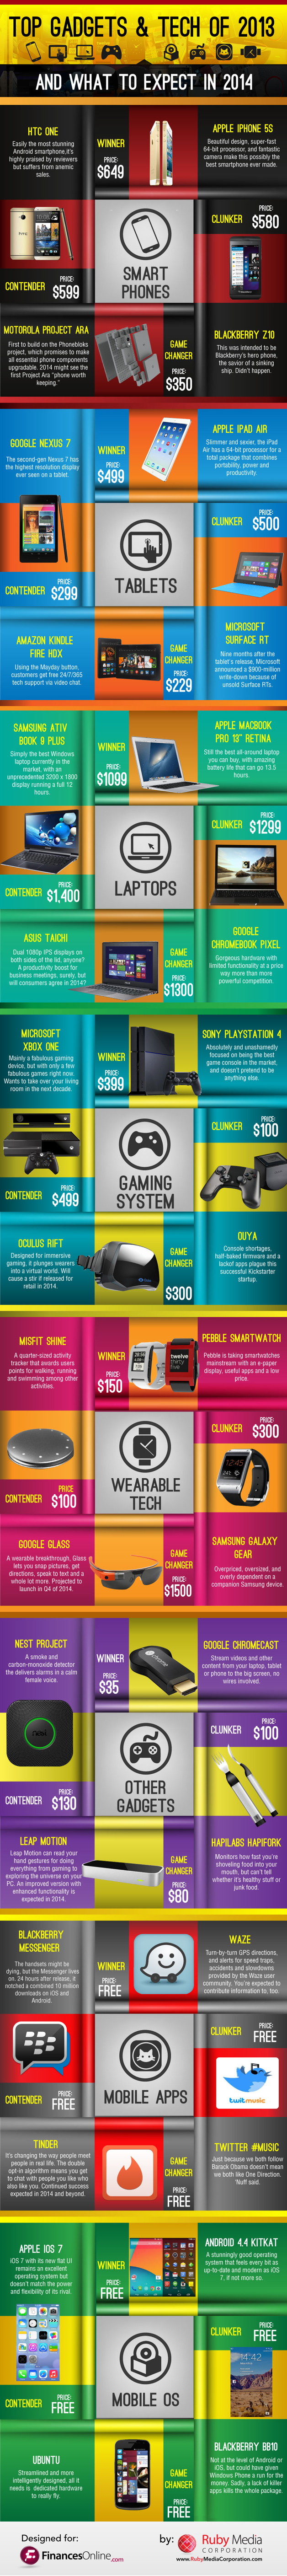 top-gadgets-2013-infographic